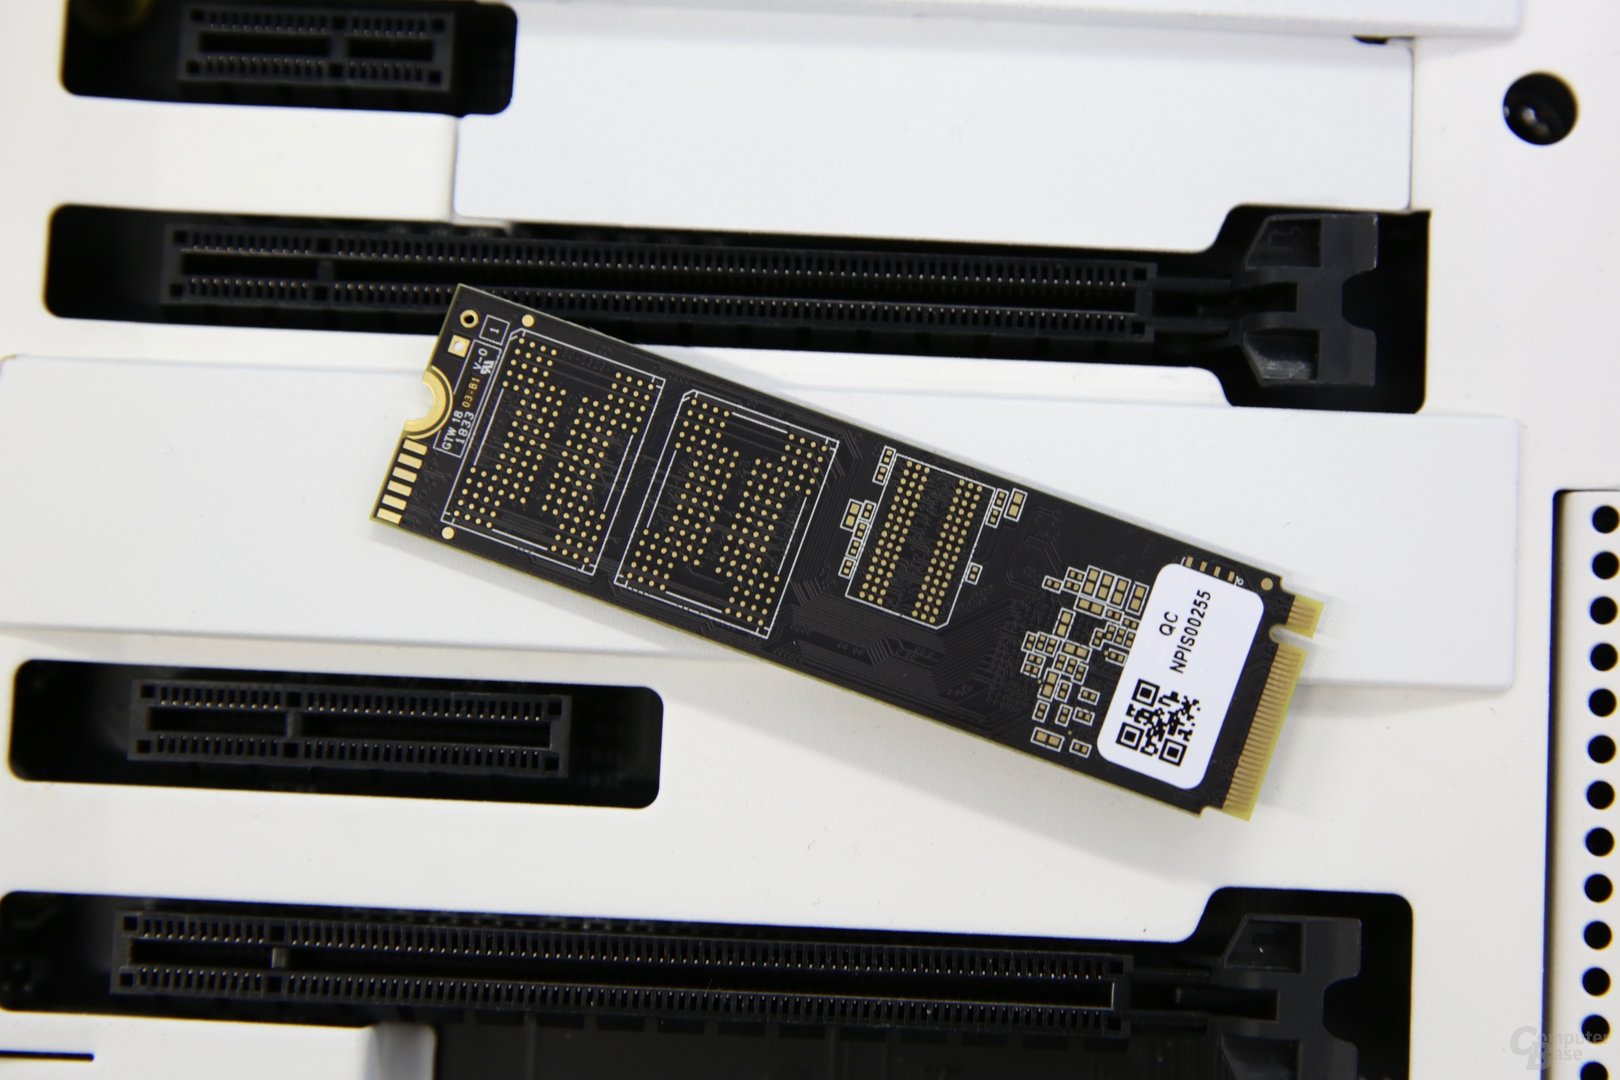 Crucial P1 NVMe SSD